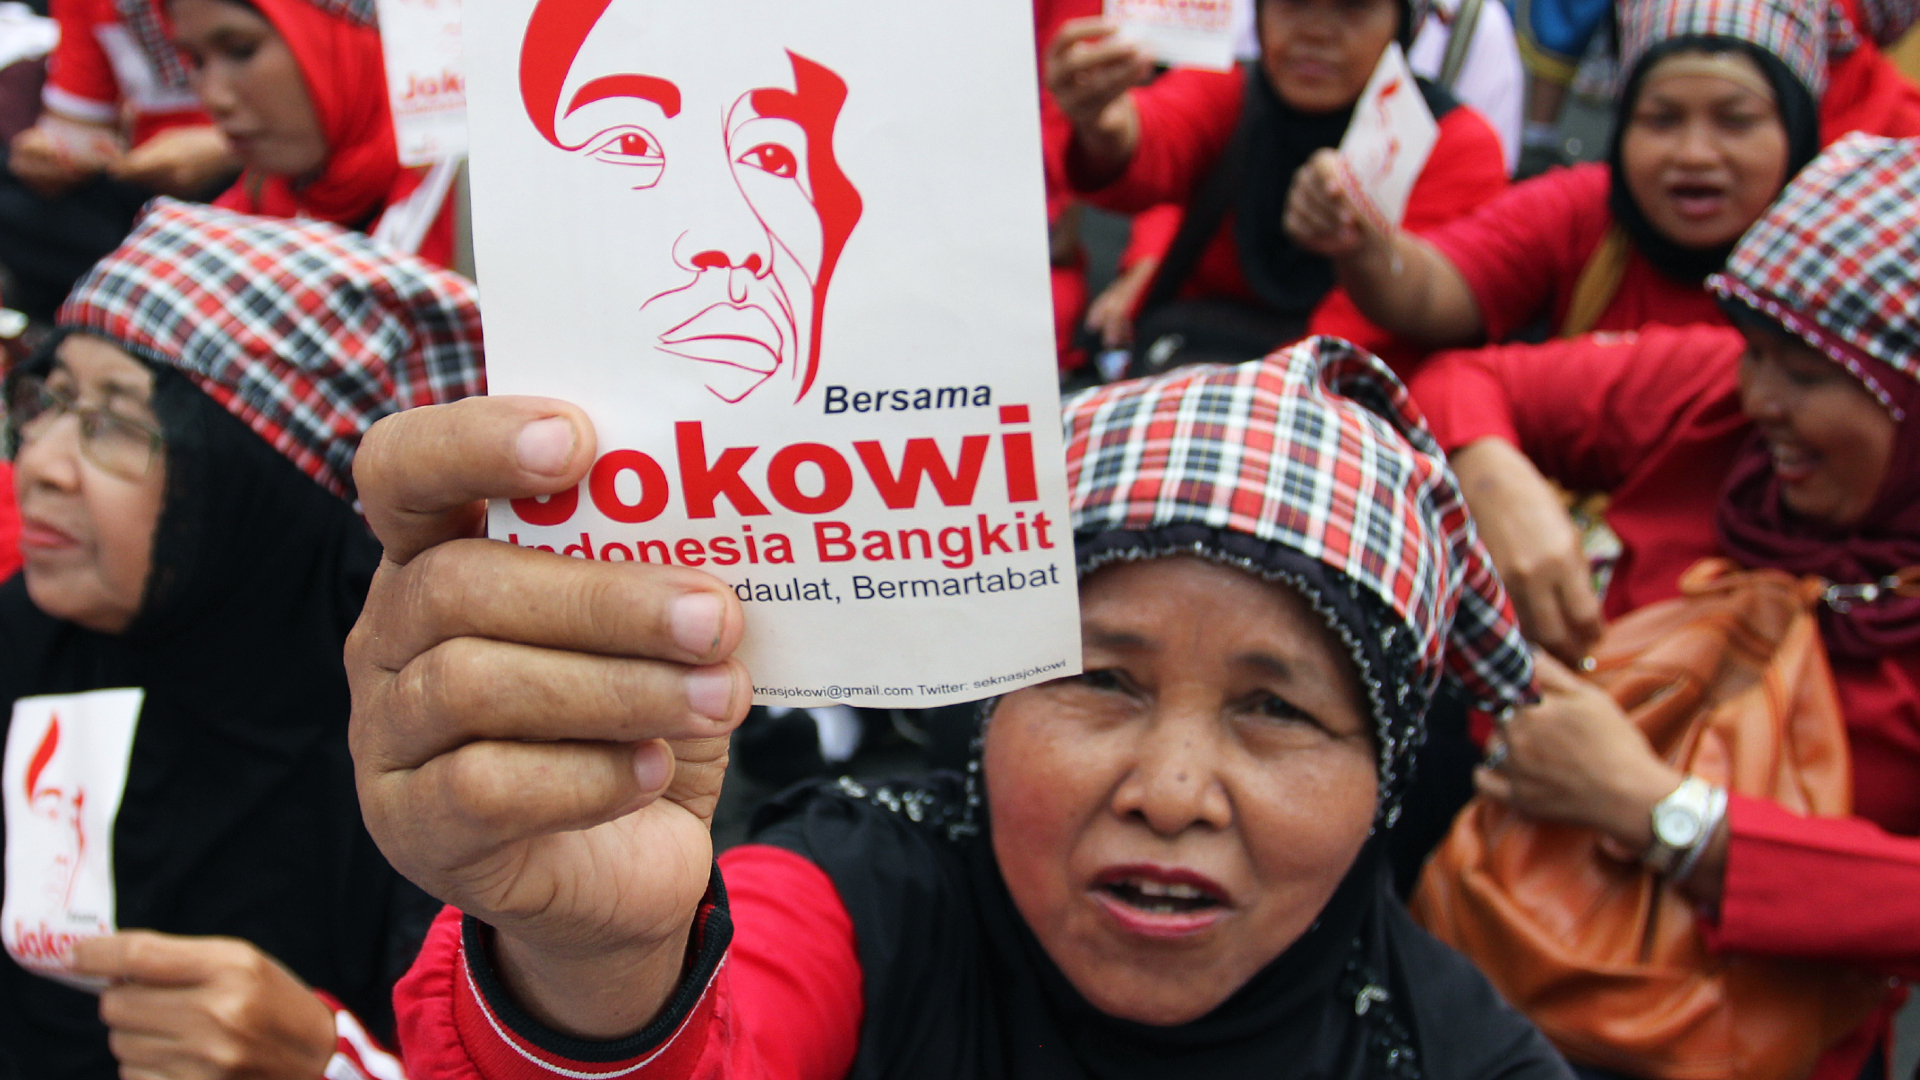 Indonesia: Covering elections